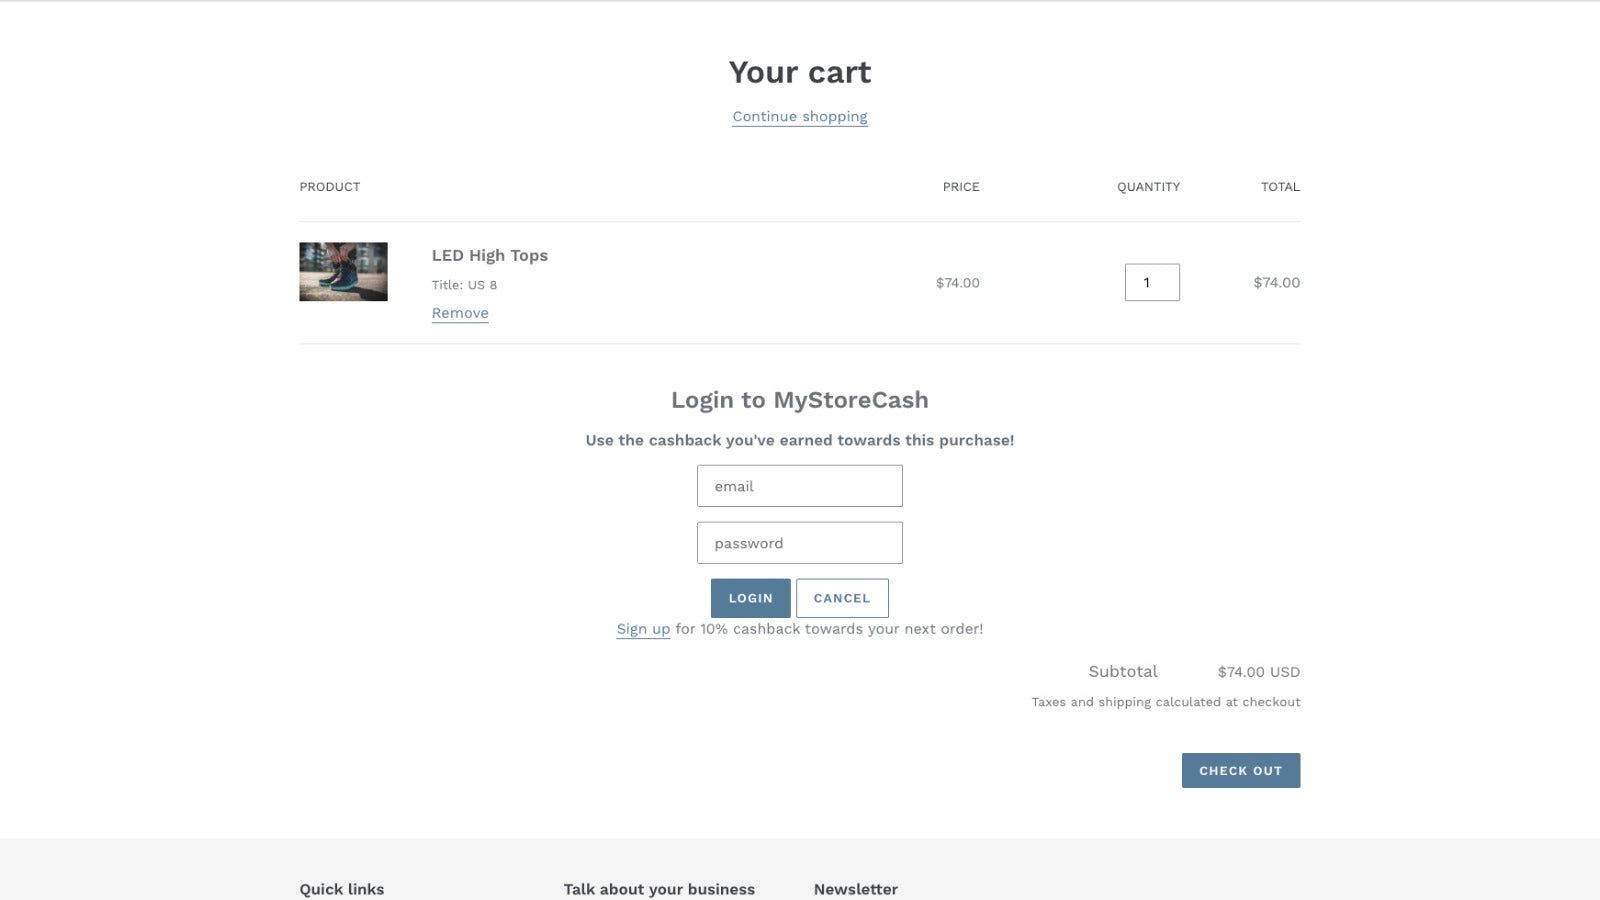 Users can login to MyStoreCash to retrieve their store-credits